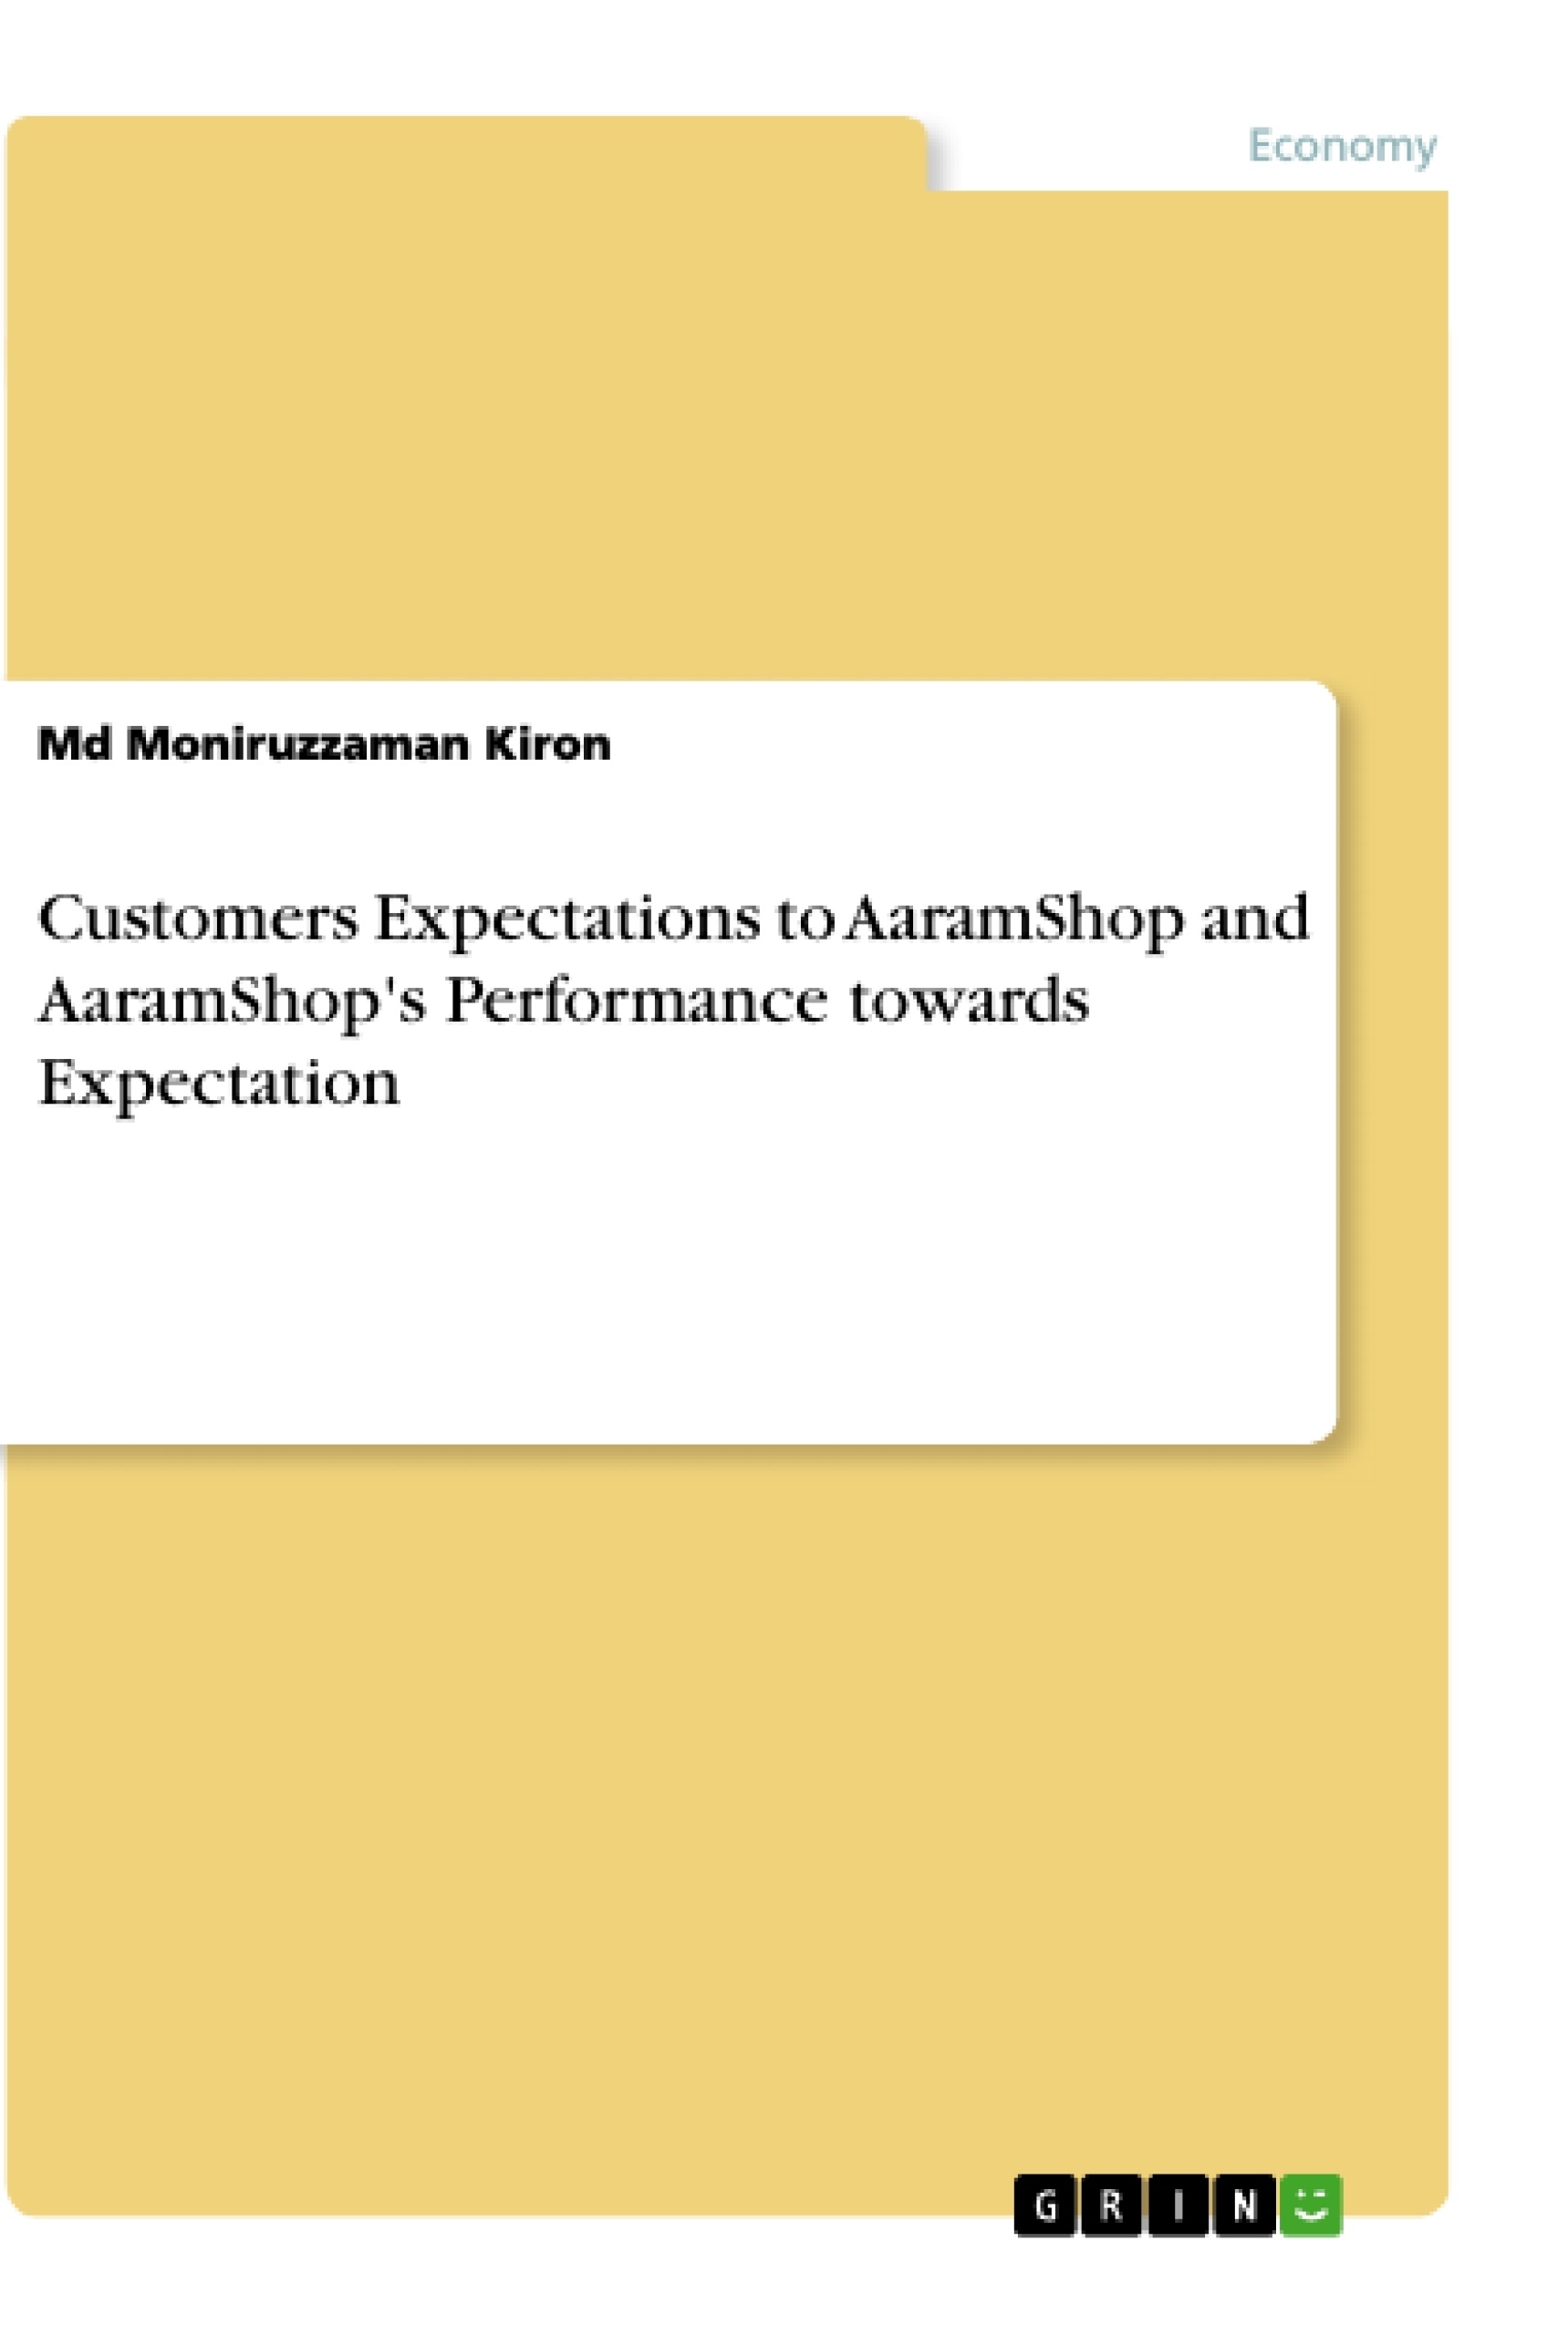 Título: Customers Expectations to AaramShop and AaramShop's Performance towards Expectation